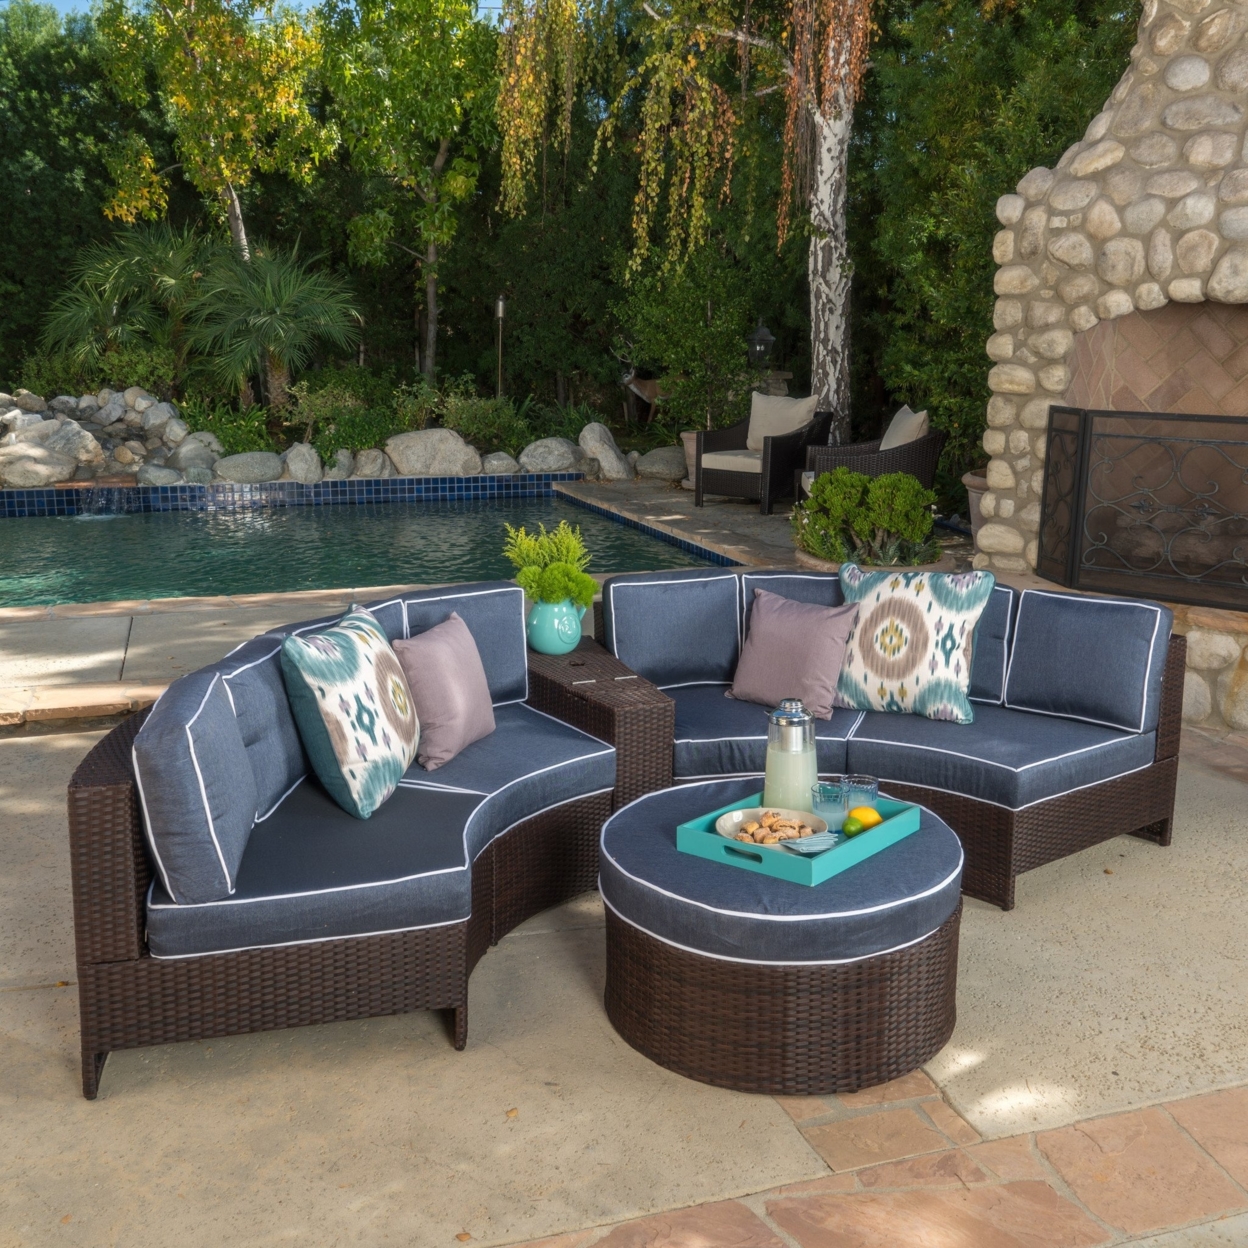 Riviera 6pc Outdoor Sectional Sofa Set With Storage Trunk - Beige